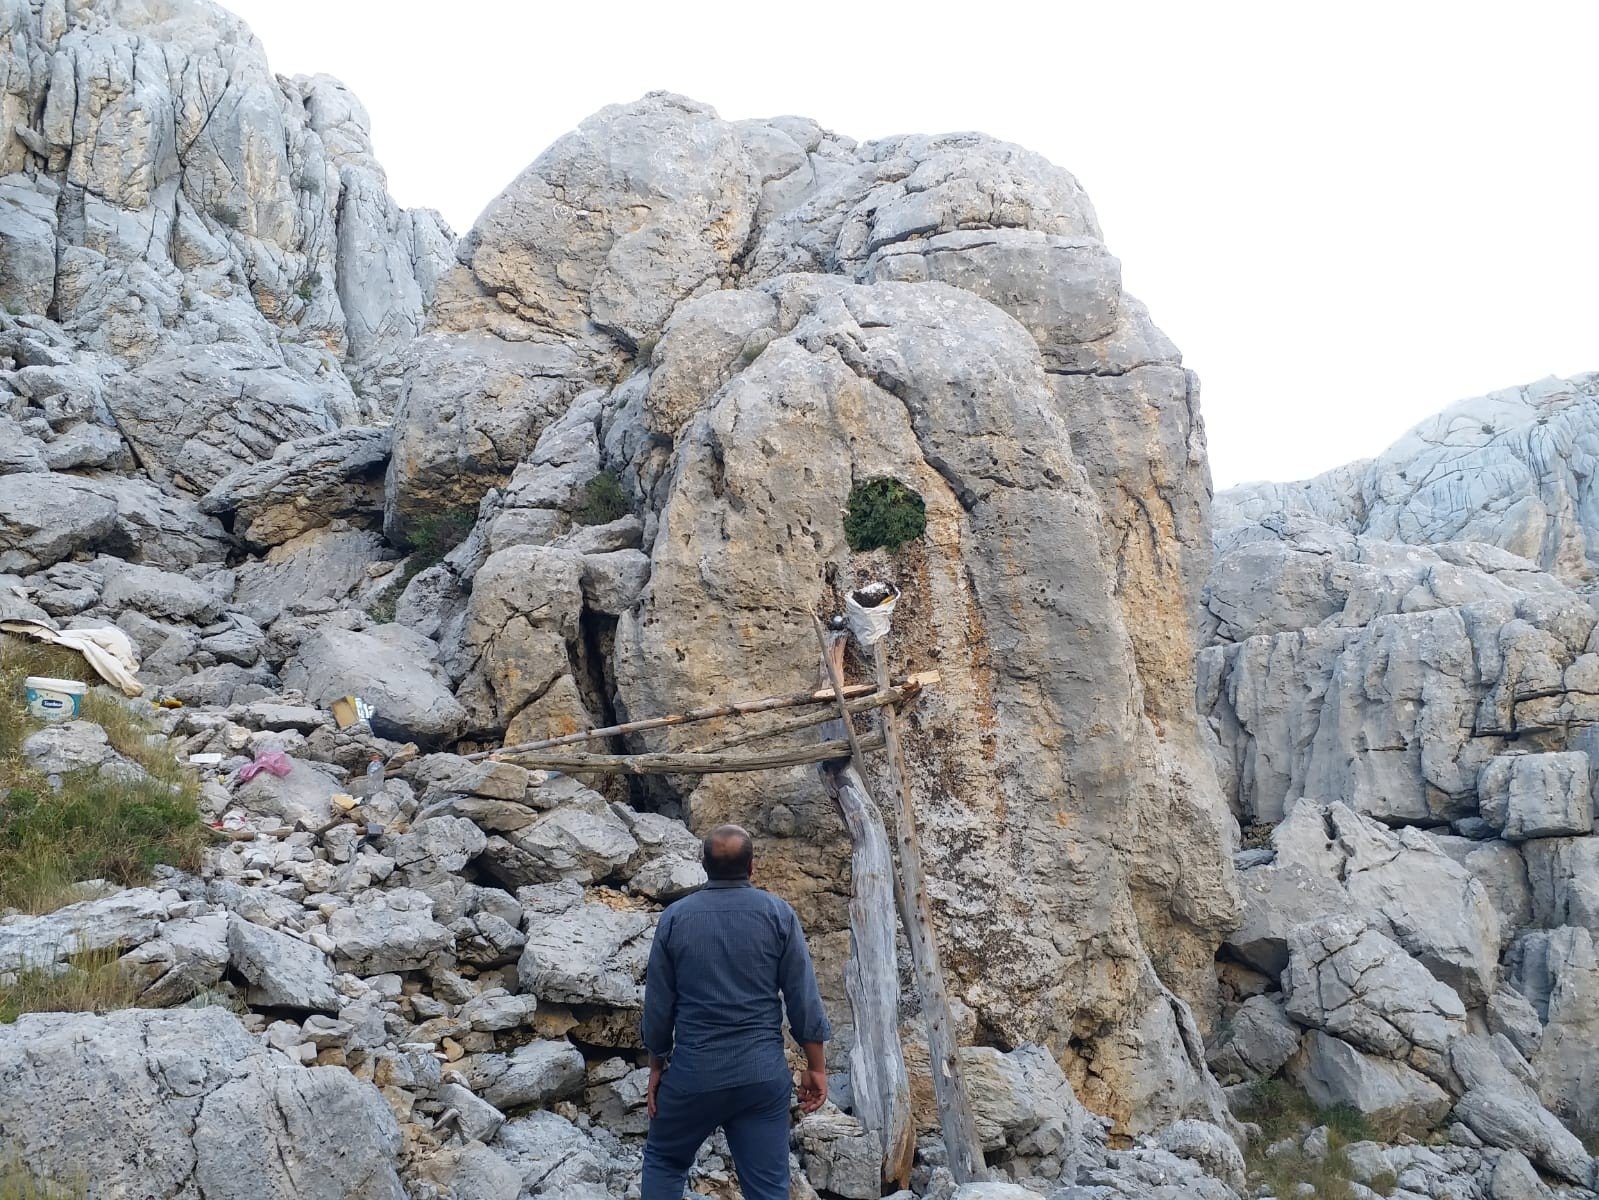 The beekeepers scale a rock face on makeshift scaffolding to extract honeycombs from a wild beehive in Antalya, southern Turkey, Oct. 17, 2021. (IHA Photo)